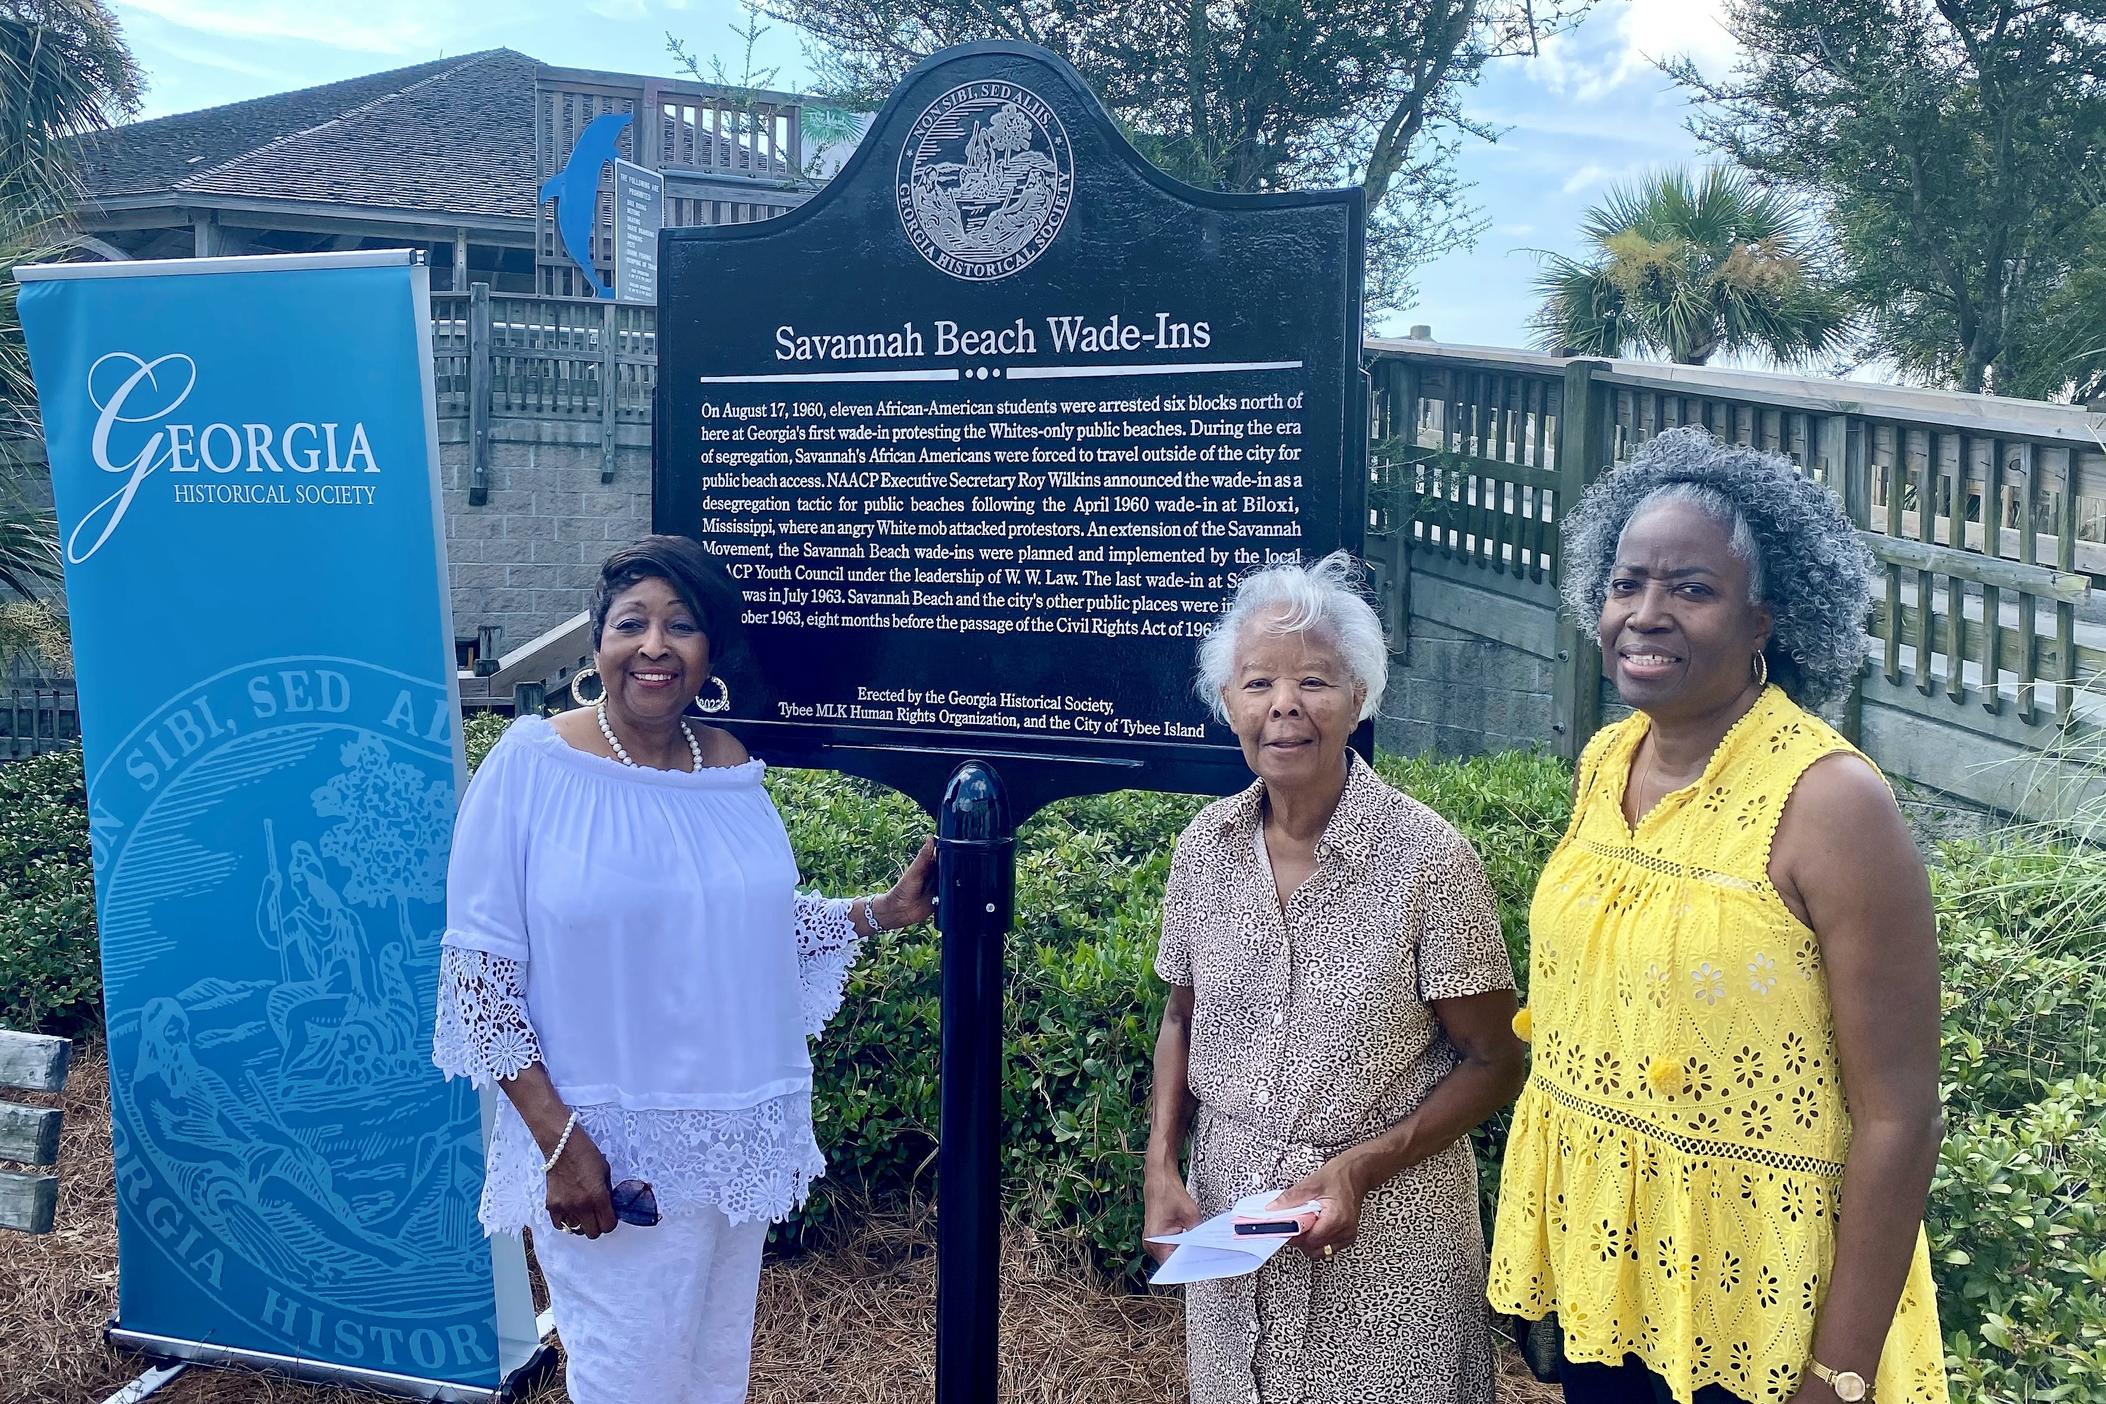 Georgia State Rep. Edna Jackson, Evalena Hoskins, and Mary Gray pose next to a new historical marker on Tybee Island commemorating the Savannah Beach Wade-Ins of the early 1960s.